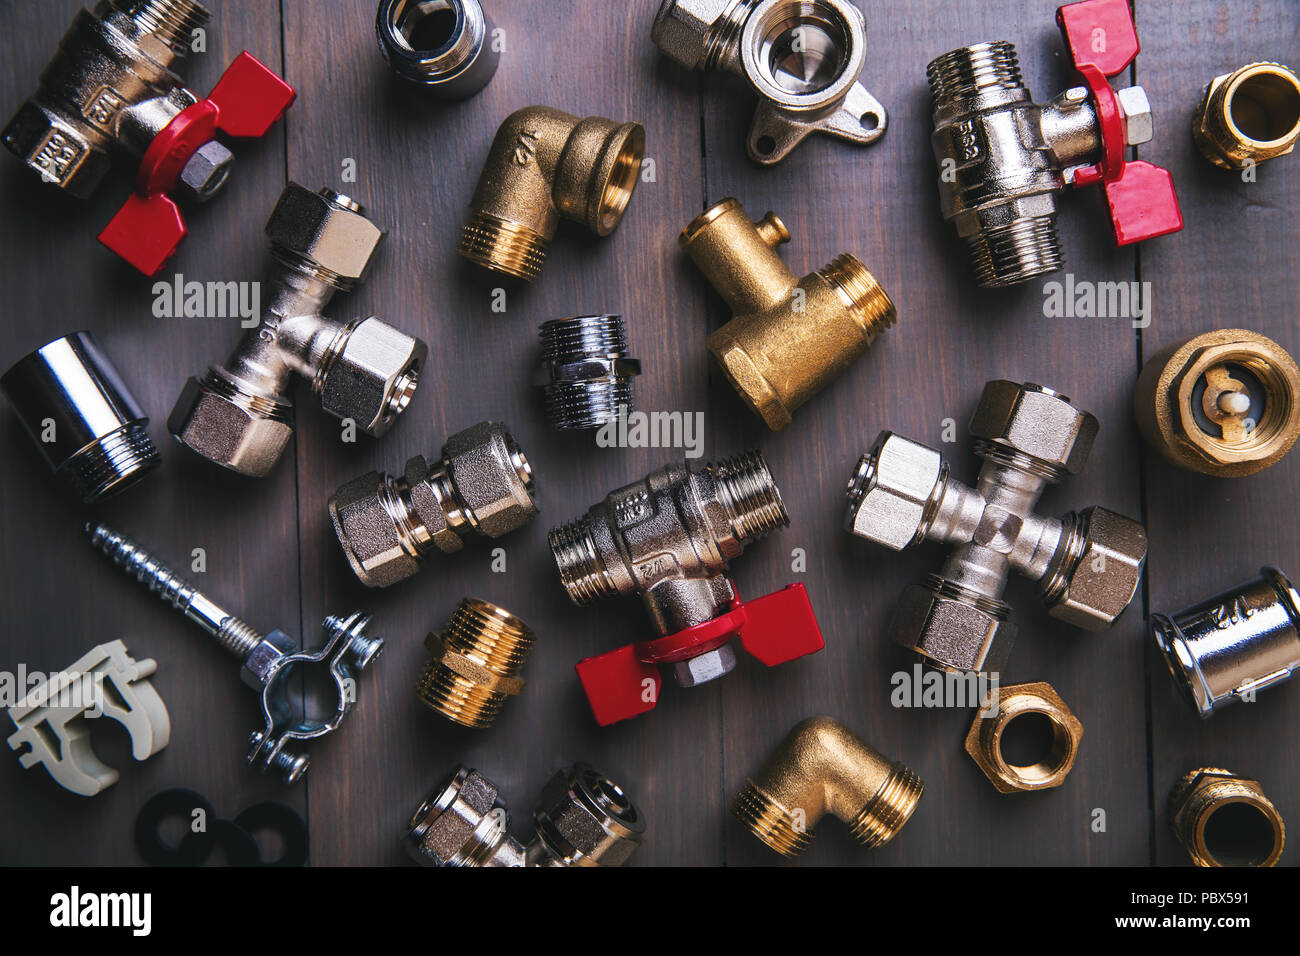 group of plumbing fittings and equipment on wooden background Stock Photo